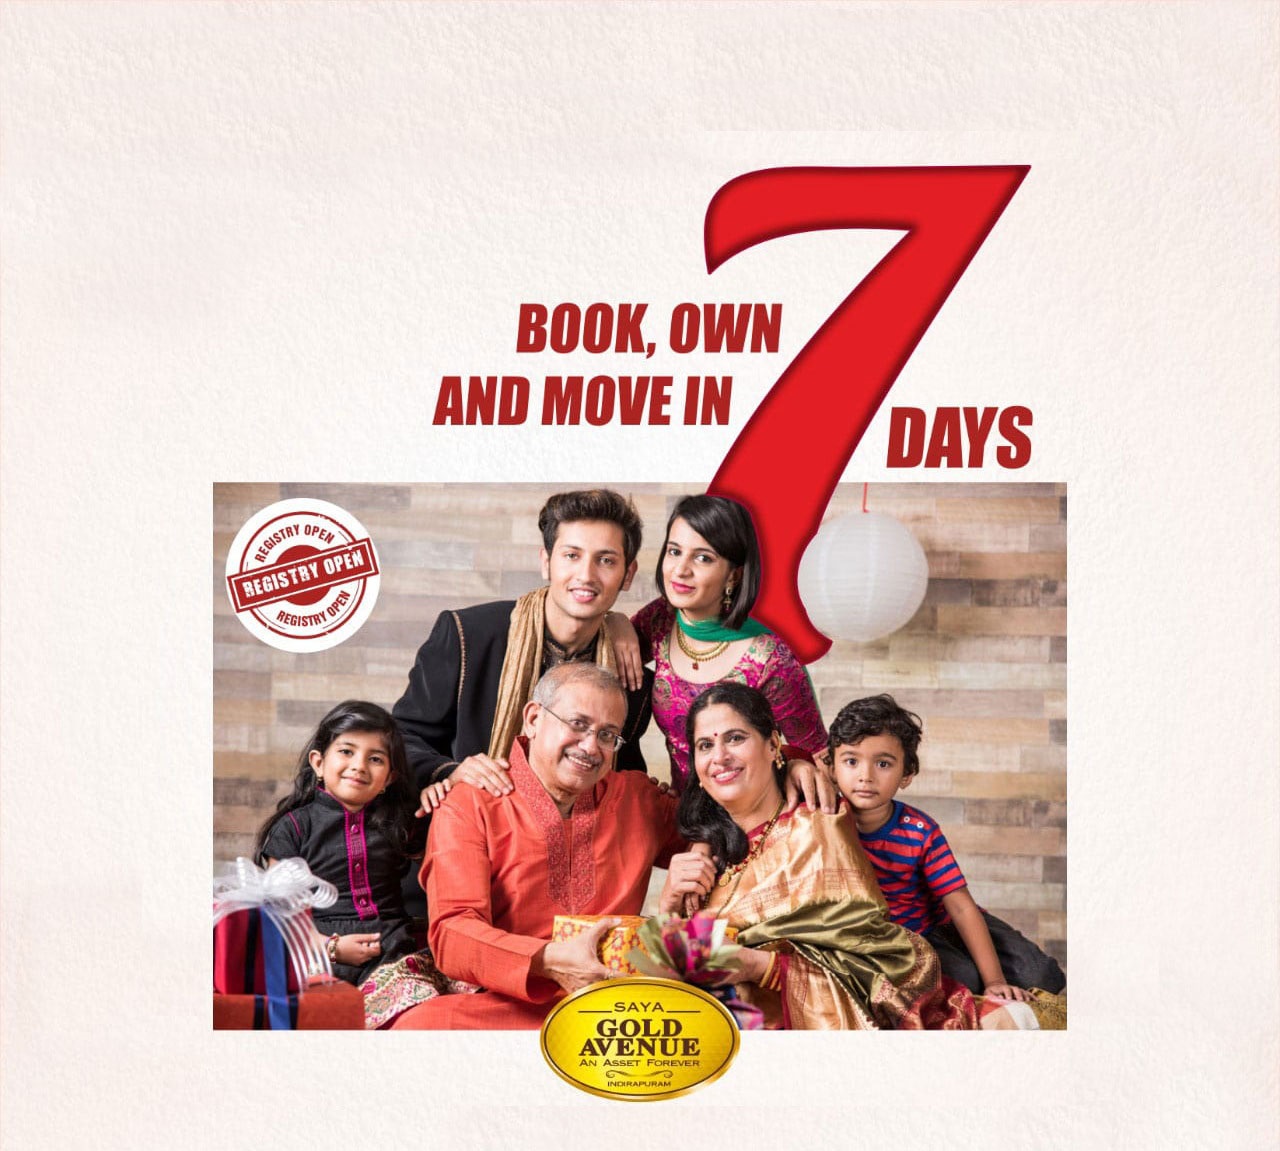 Book own and move in 7 days at Saya Gold Avenue in Indirapuram, Ghaziabad